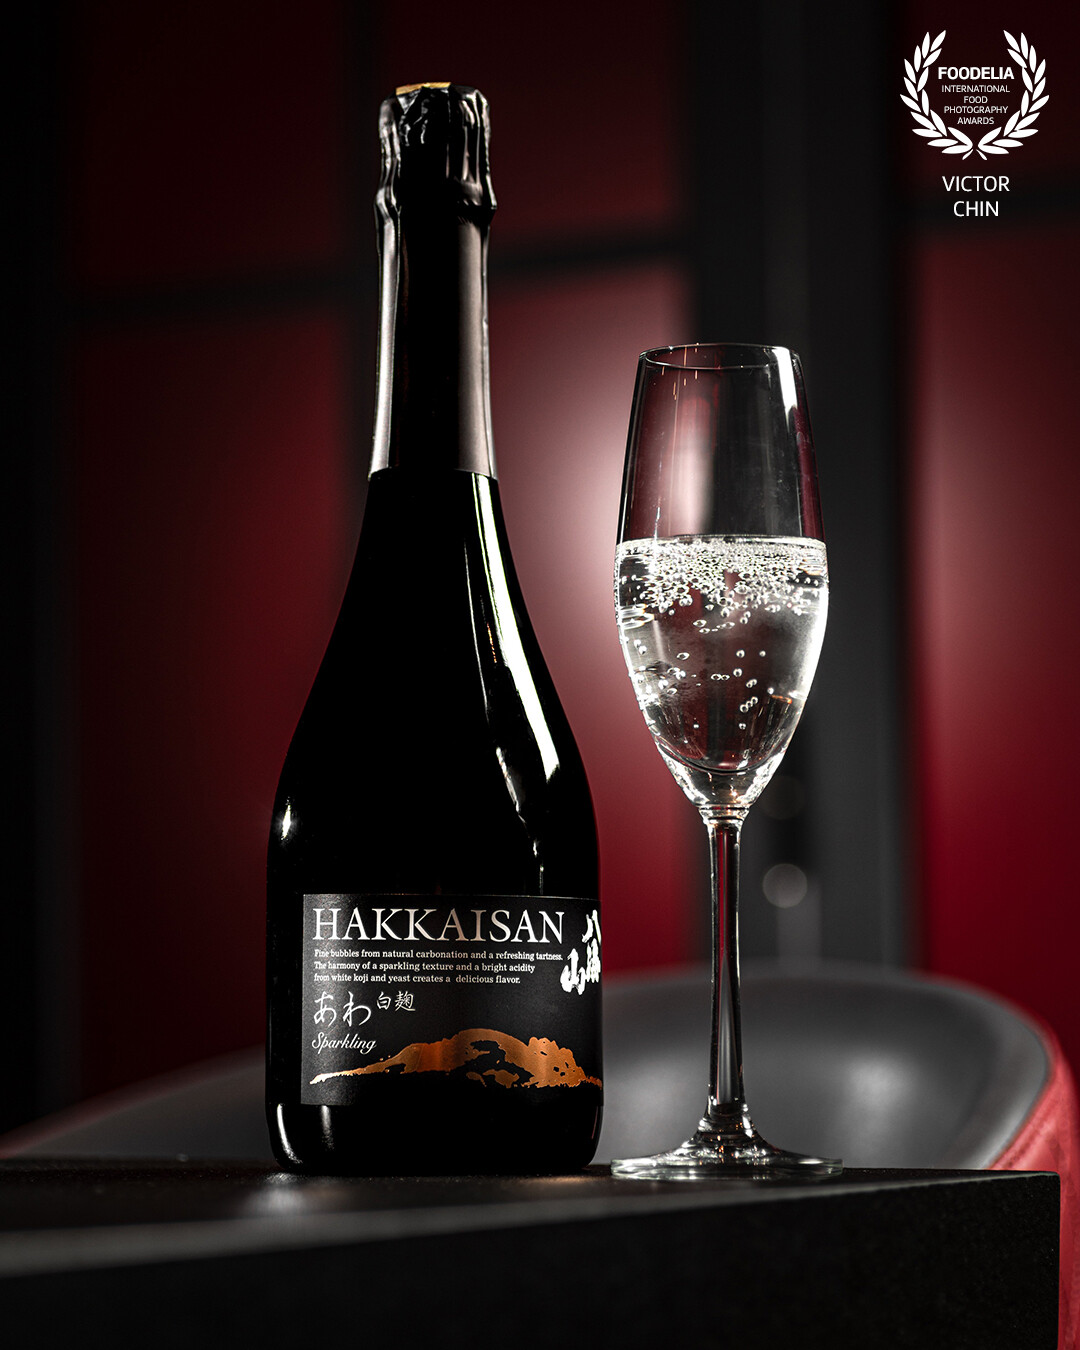 𝐇𝐚𝐤𝐤𝐚𝐢𝐬𝐚𝐧 𝐬𝐚𝐤𝐞, a true embodiment of excellence. Crafted with meticulous care, it captivates with its refined flavors and impeccable quality.<br />
<br />
Indulge in the essence of Hakkaisan and elevate your sake appreciation to new heights. <br />
<br />
A nice shot done for Yuimu Omakase in Kuala Lumpur